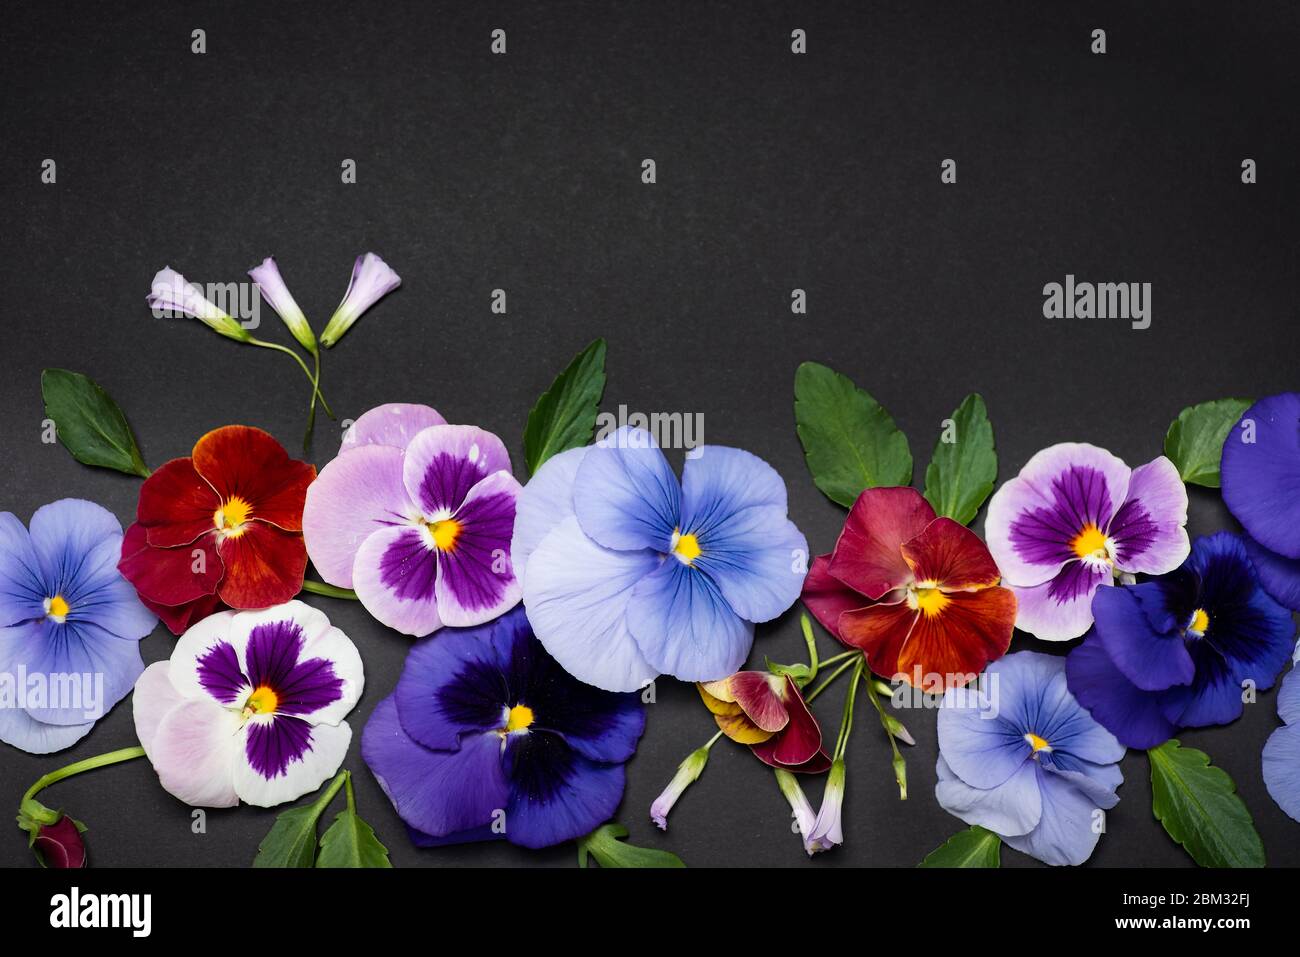 Violet flower in blossom arrangement on dark background with copy space Stock Photo